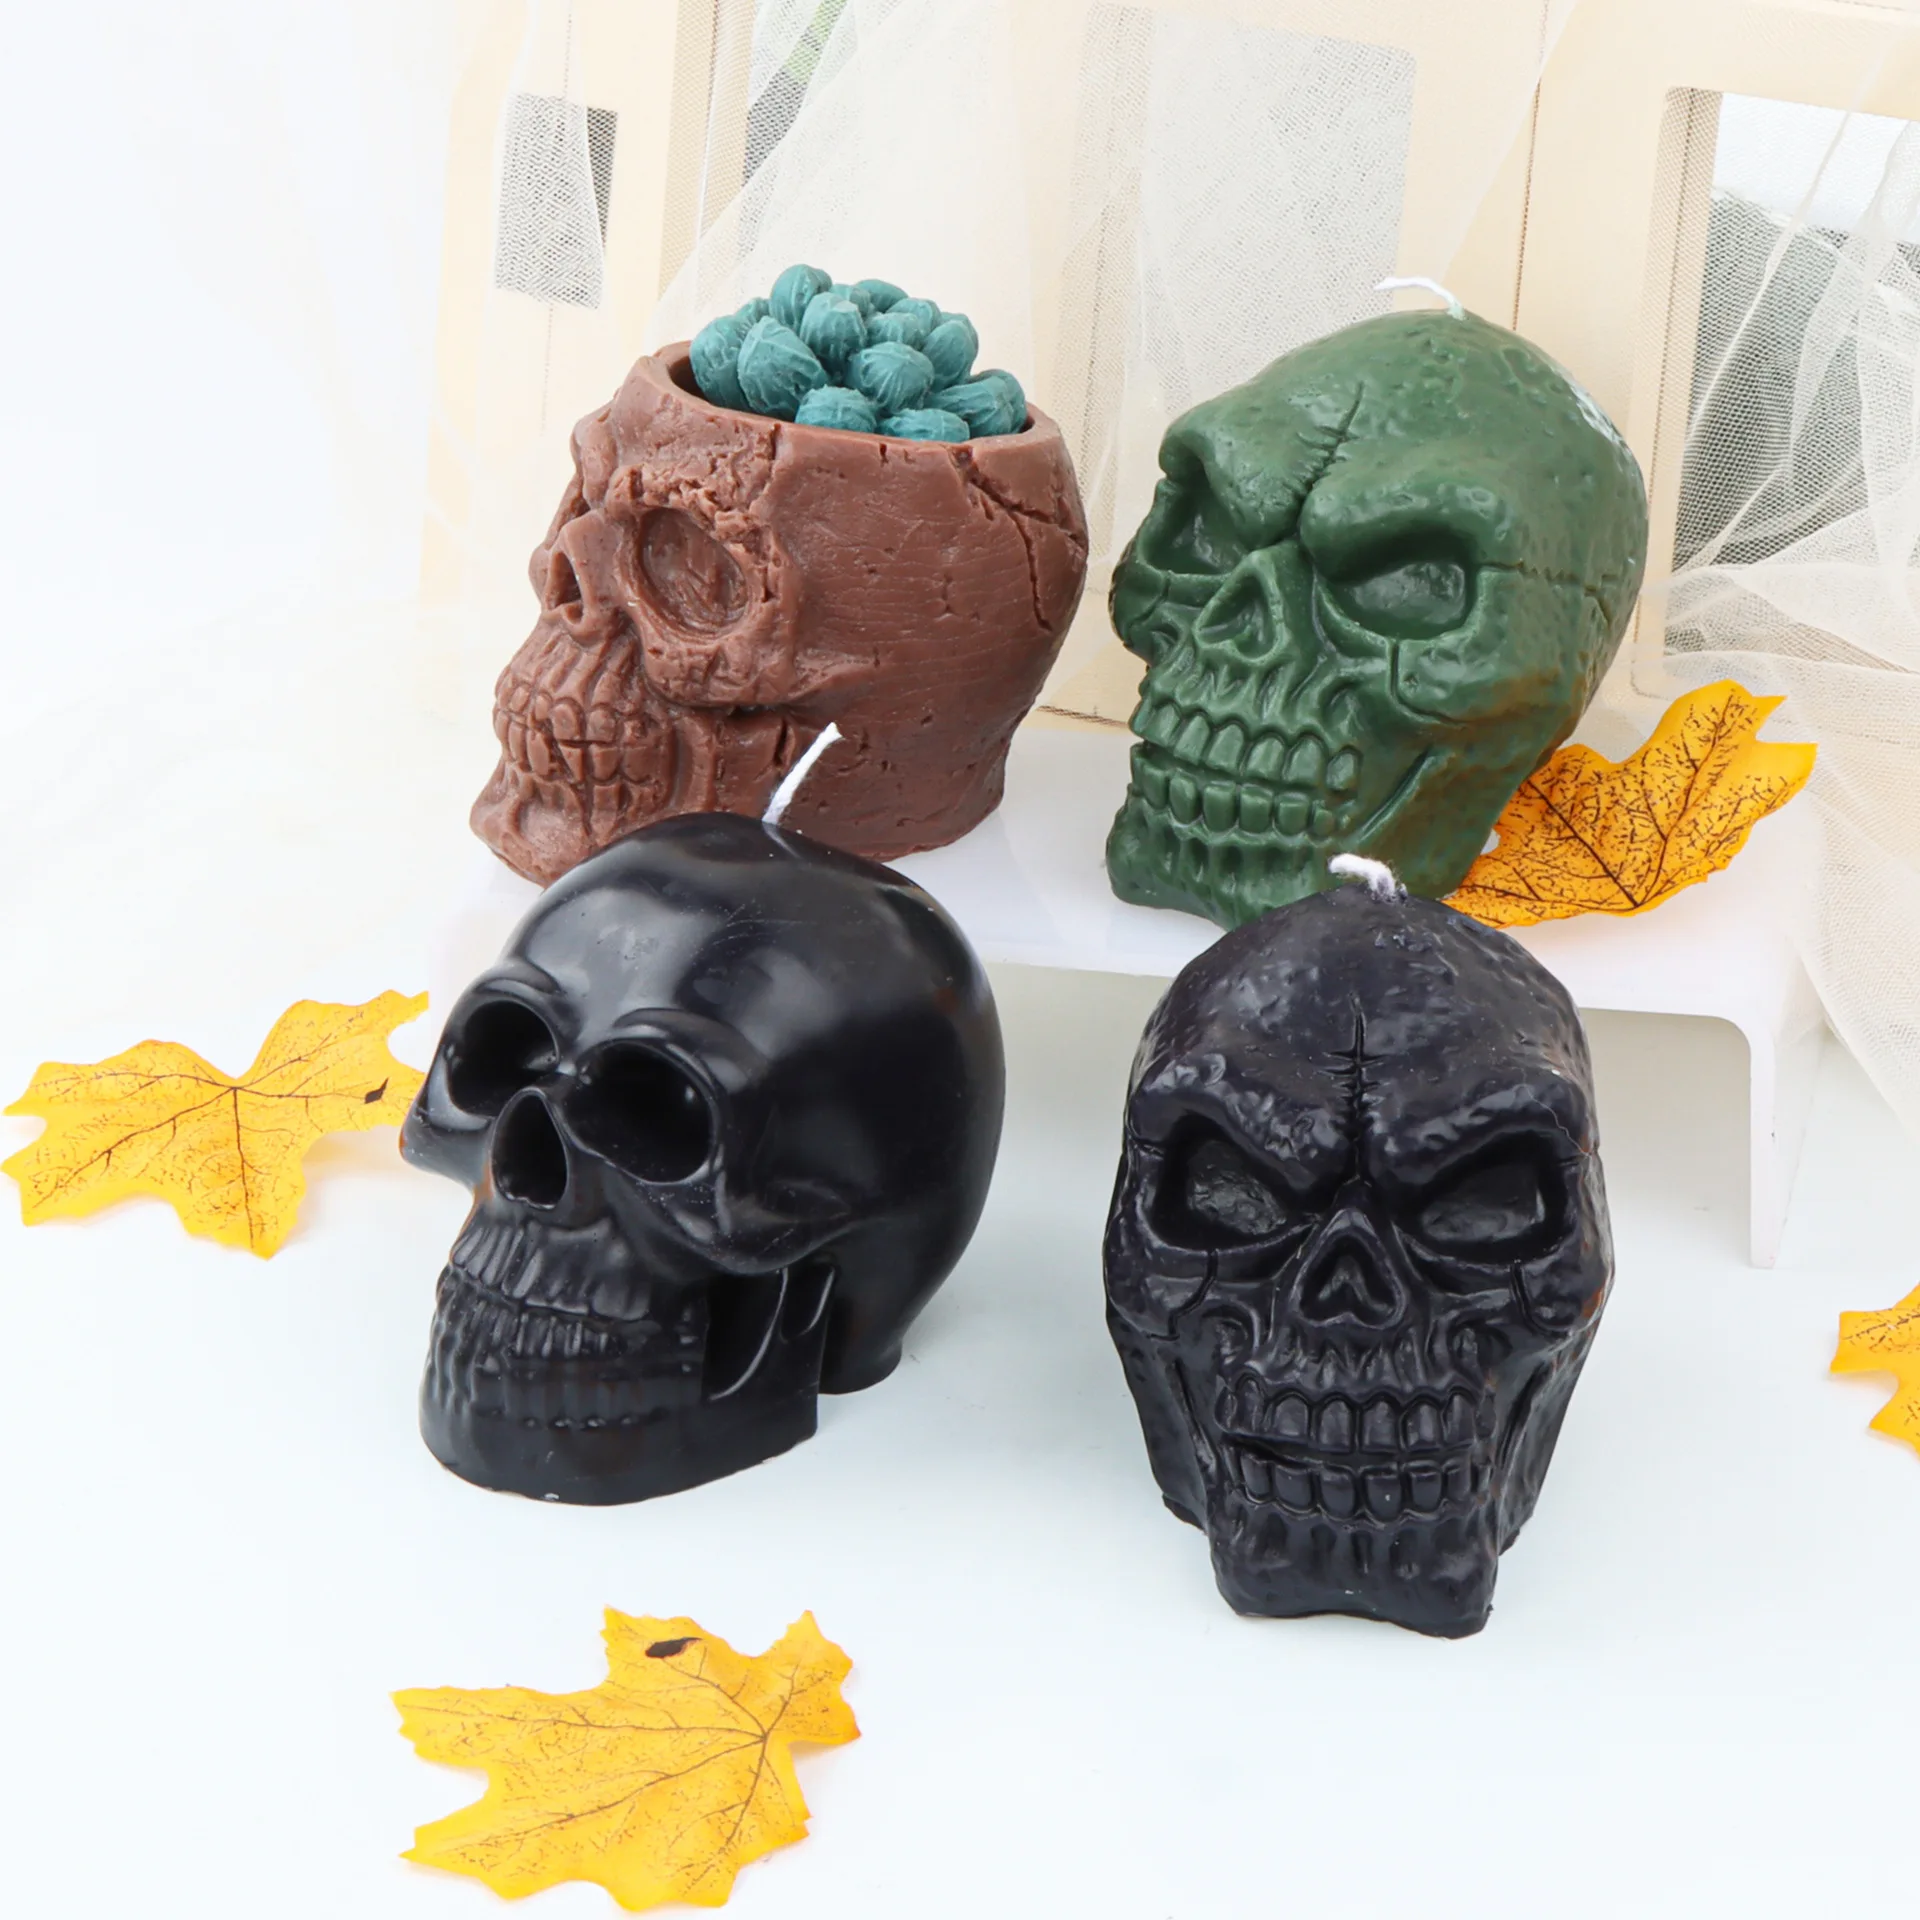 

Halloween Skull Mold Wax Candles Silicone Ice Plaster Epoxy Resin Making Soap Handmade Soaps Casting Molds Form for Decoration